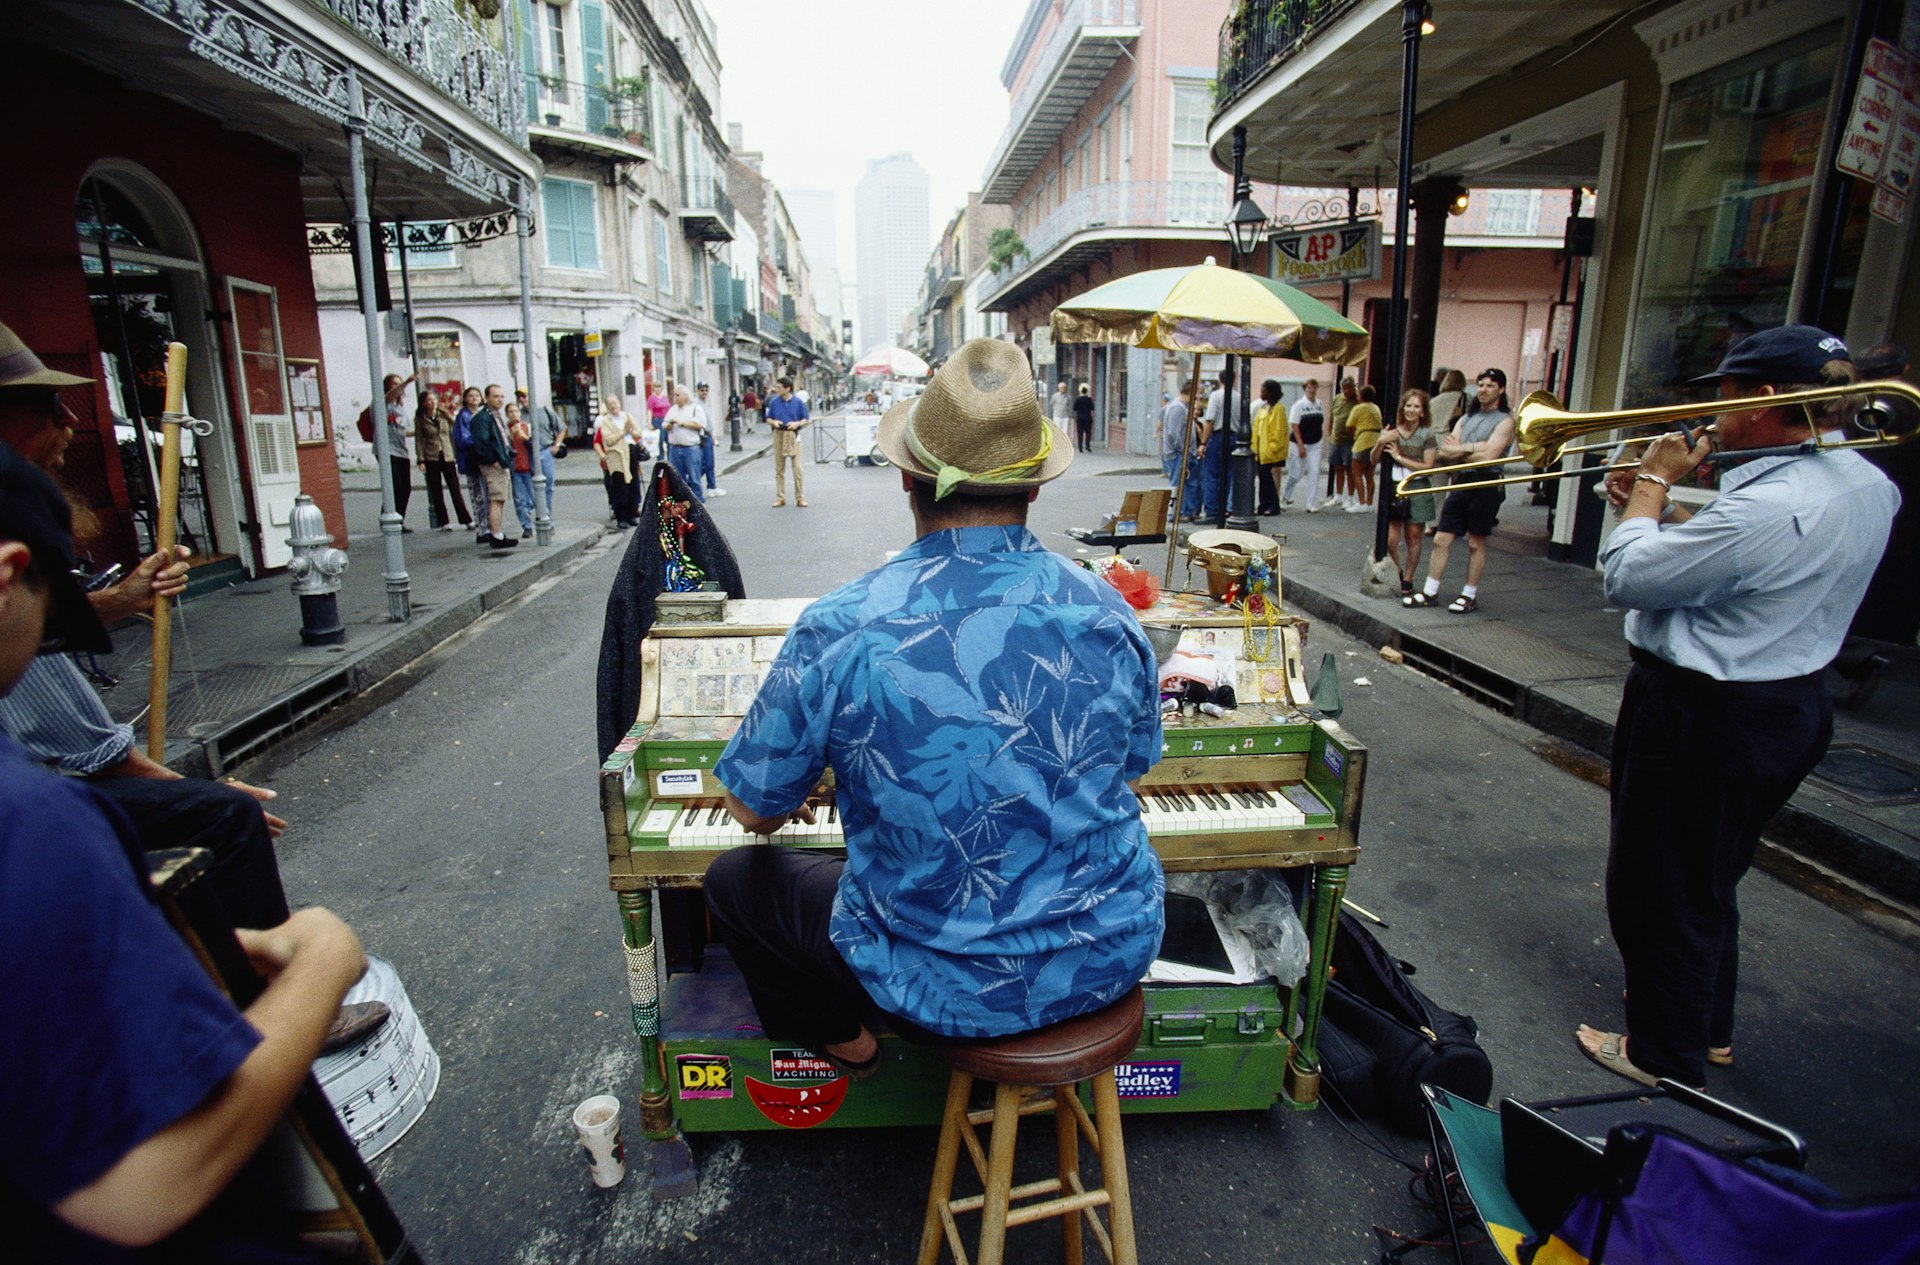 David Roe, a pianist, performs on his colorful piano along with fellow street musicians in Royal Street in New Orleans.